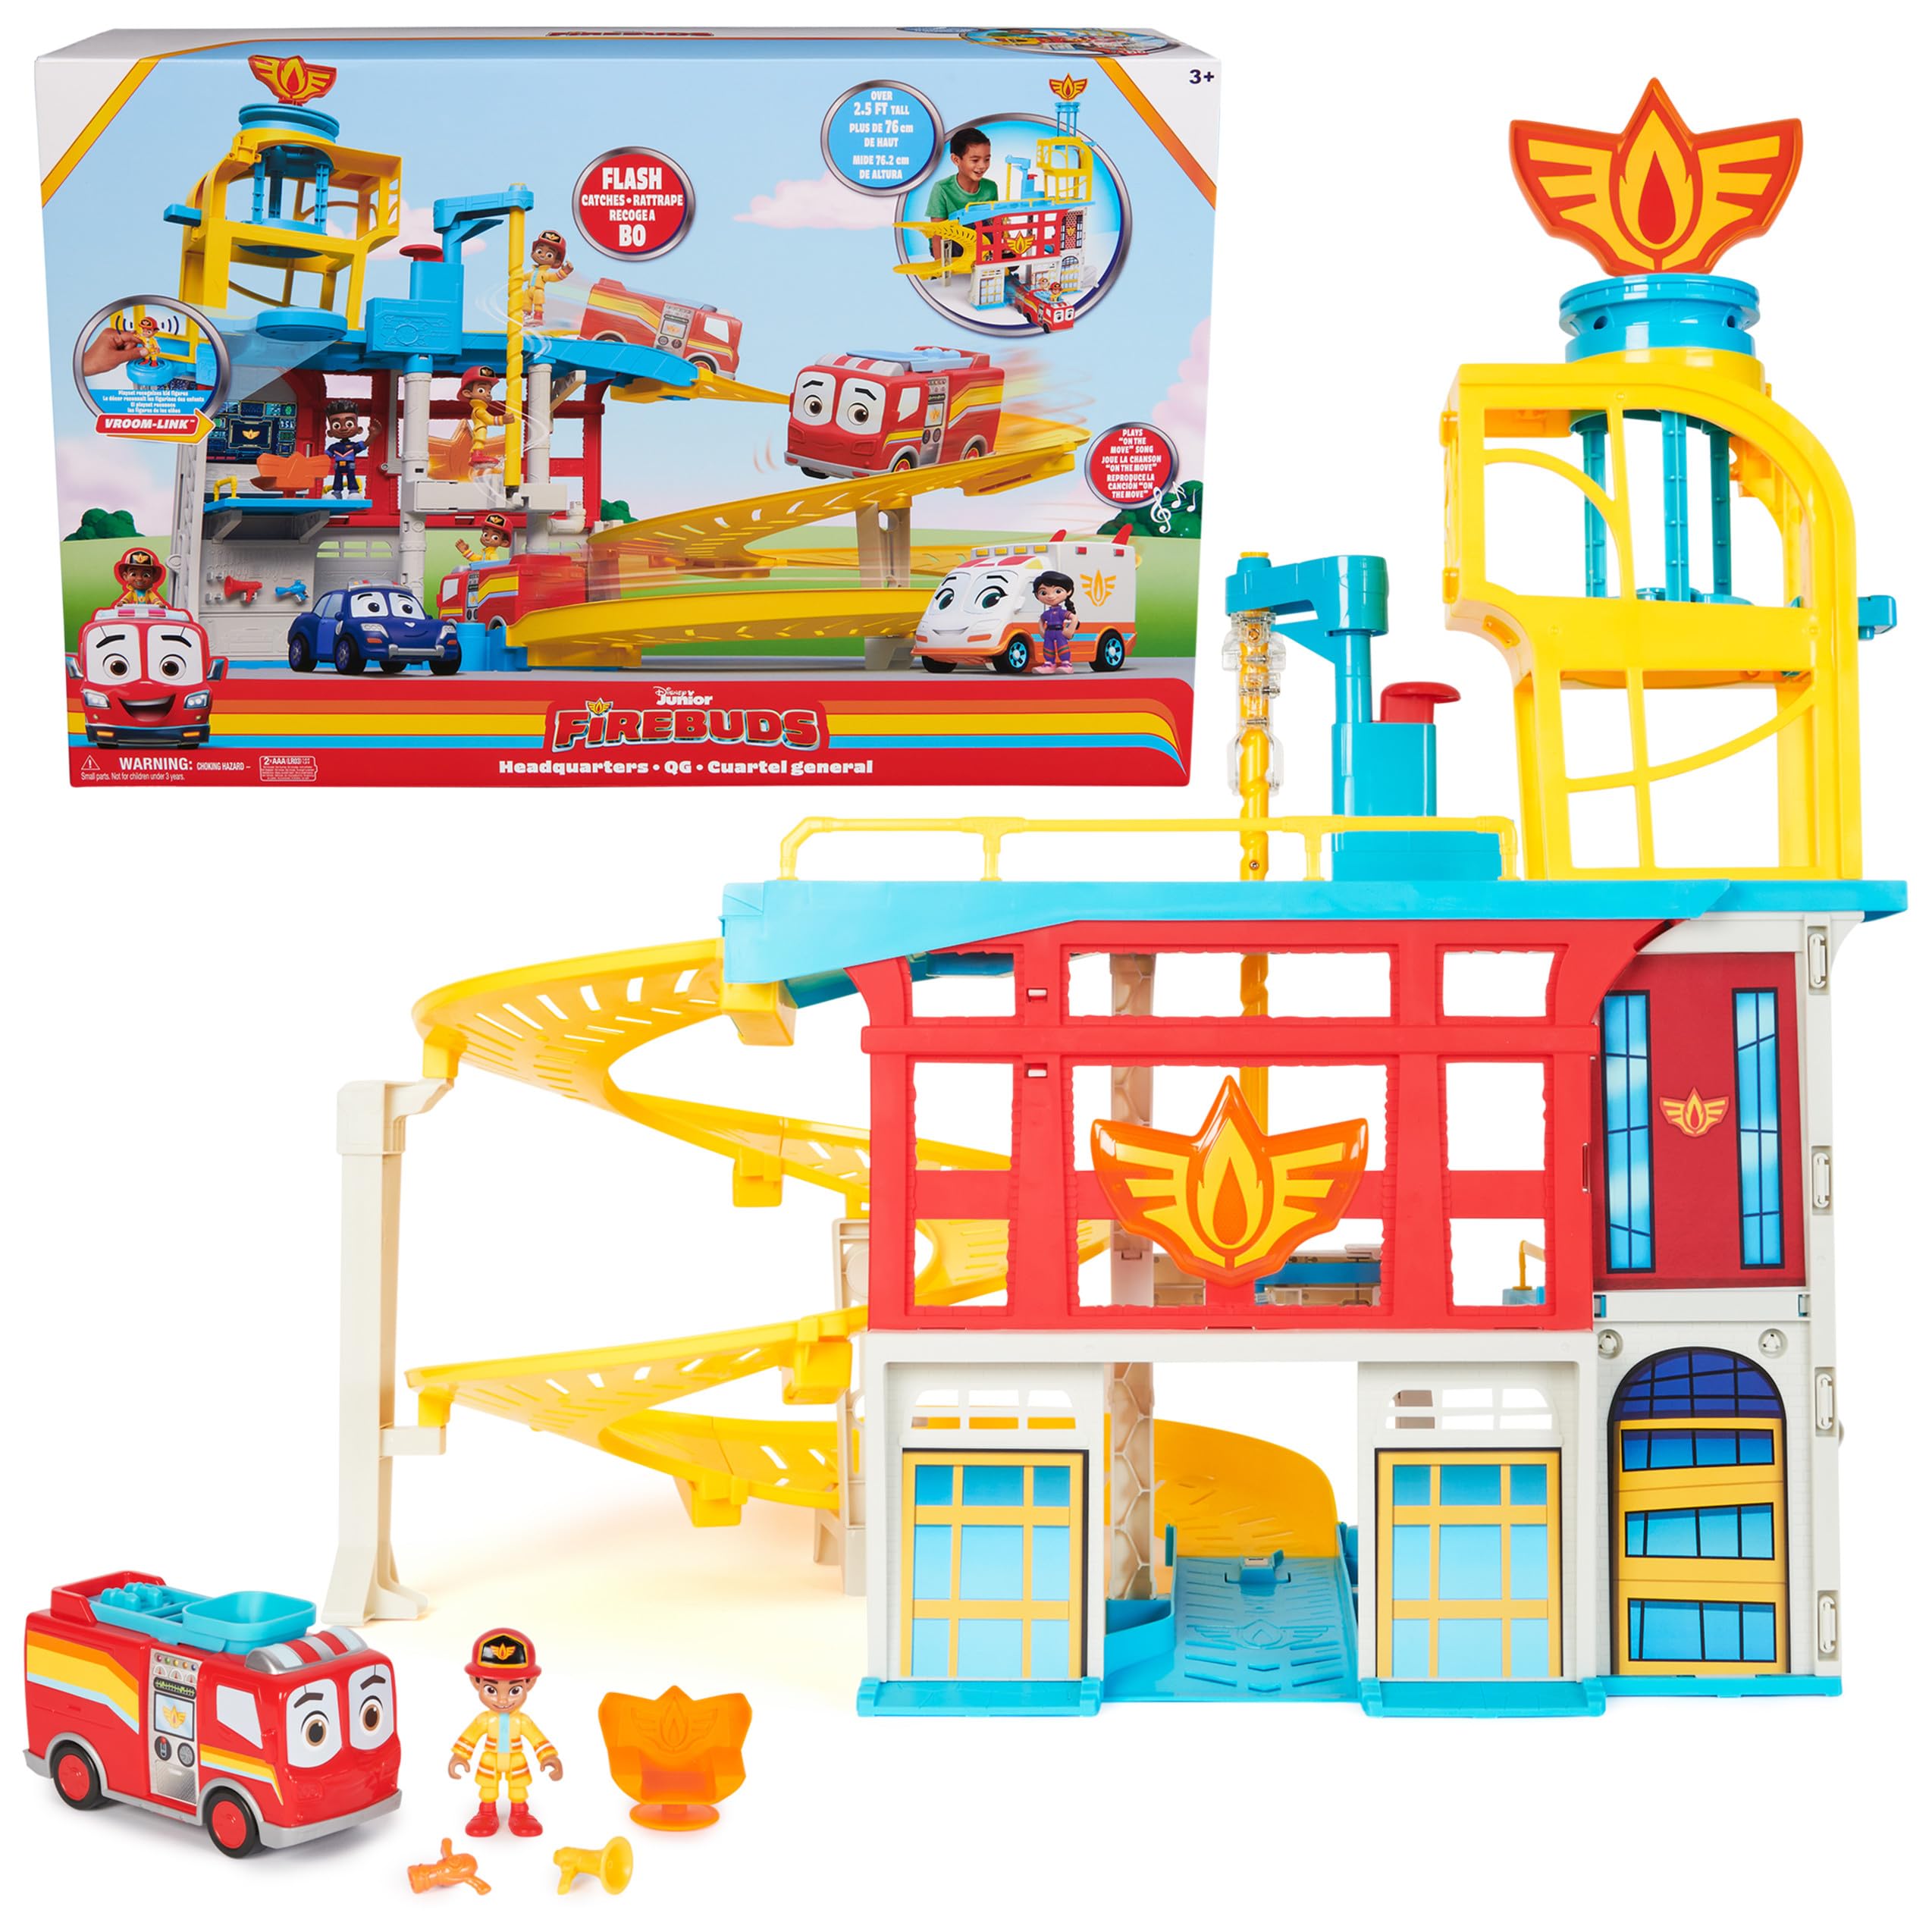 Disney Junior Firebuds HQ Vehicle Launcher Playset w/ Bo Action Figure, Vehicle, 3x Accessories, & Sticker Sheet $22.54 + Free Shipping w/ Prime or on $35+